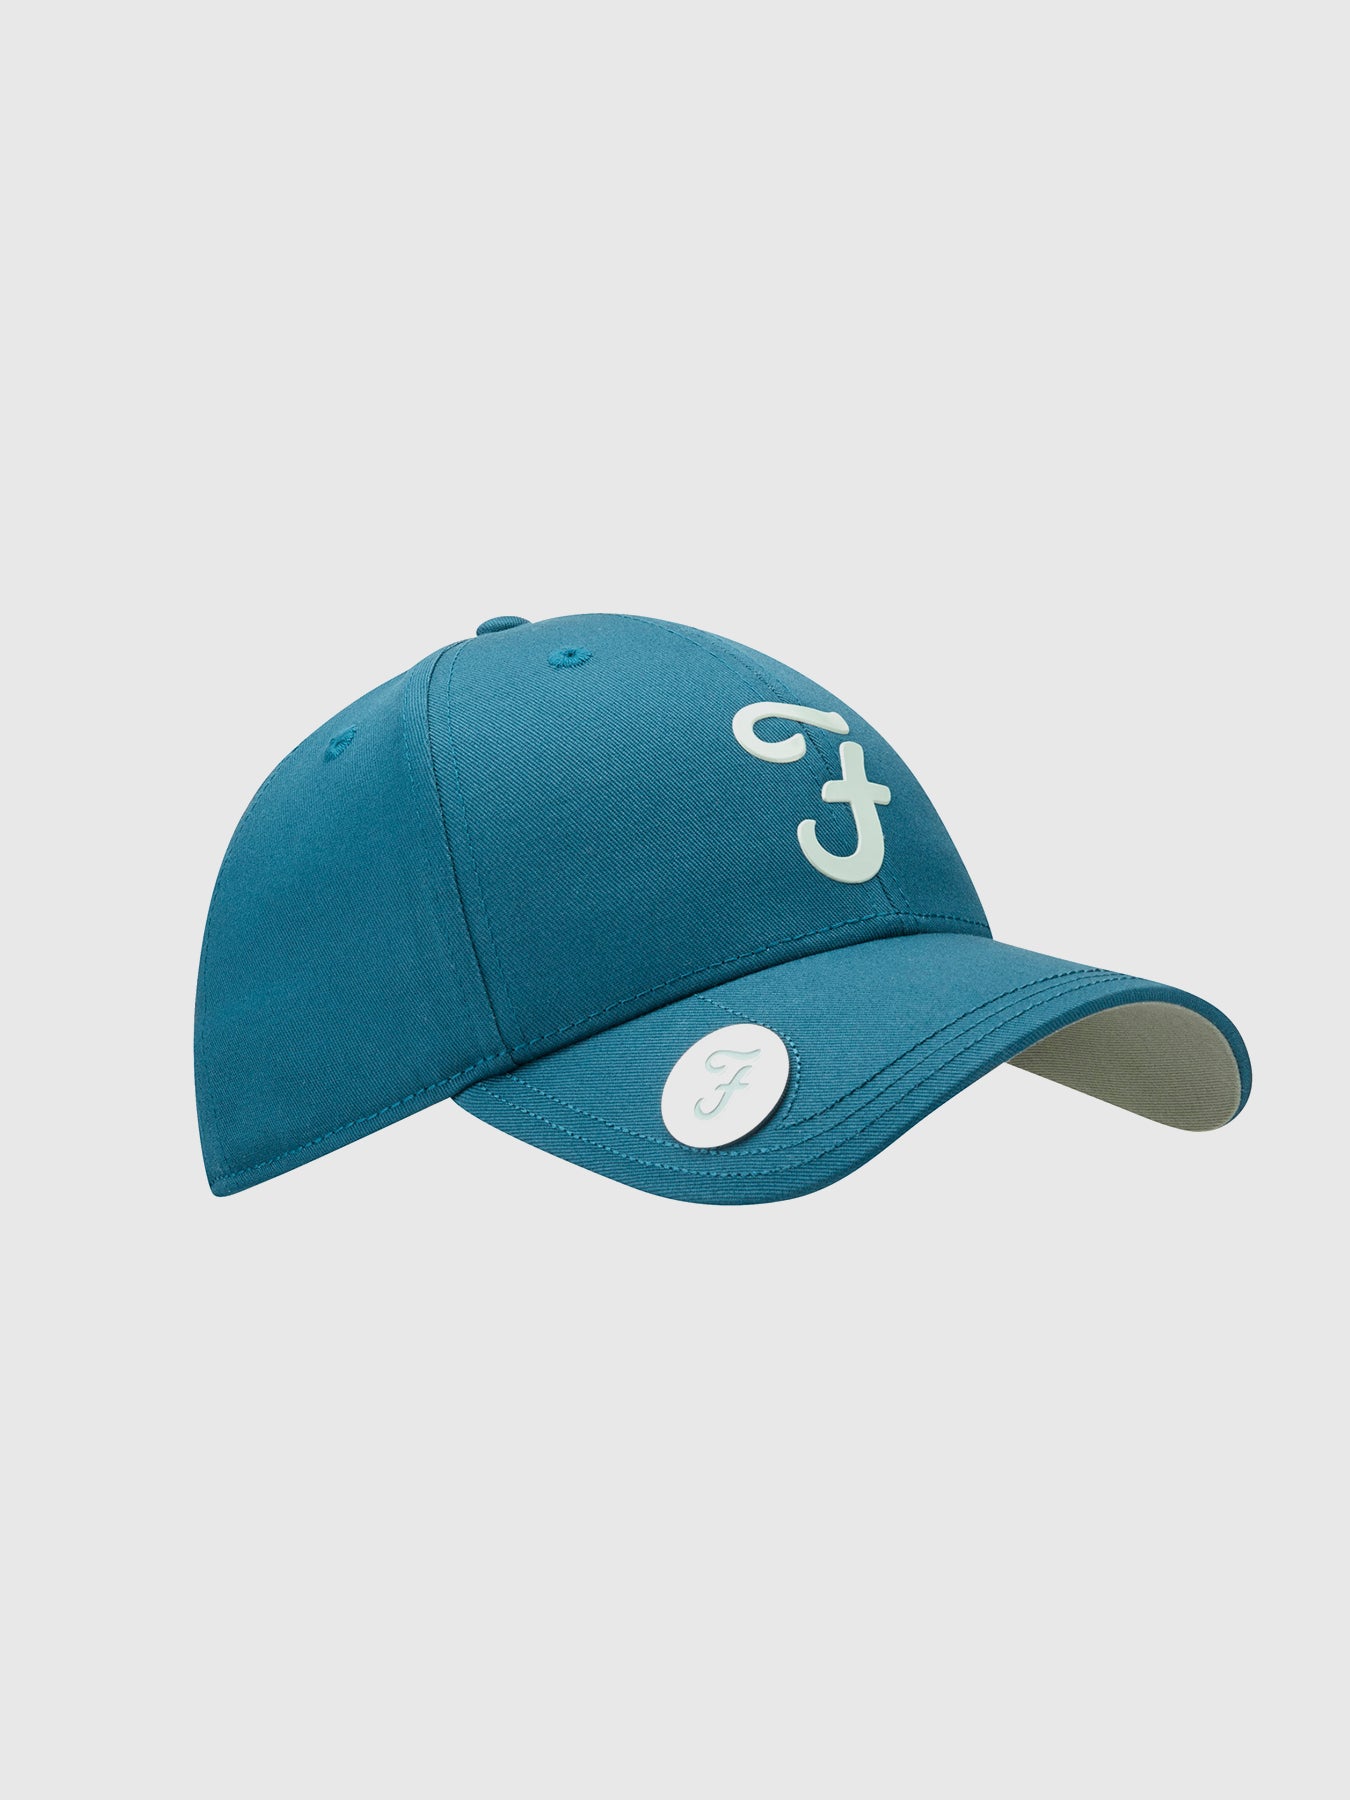 View Reno Golf Cap With Ball Marker In Farah Teal information